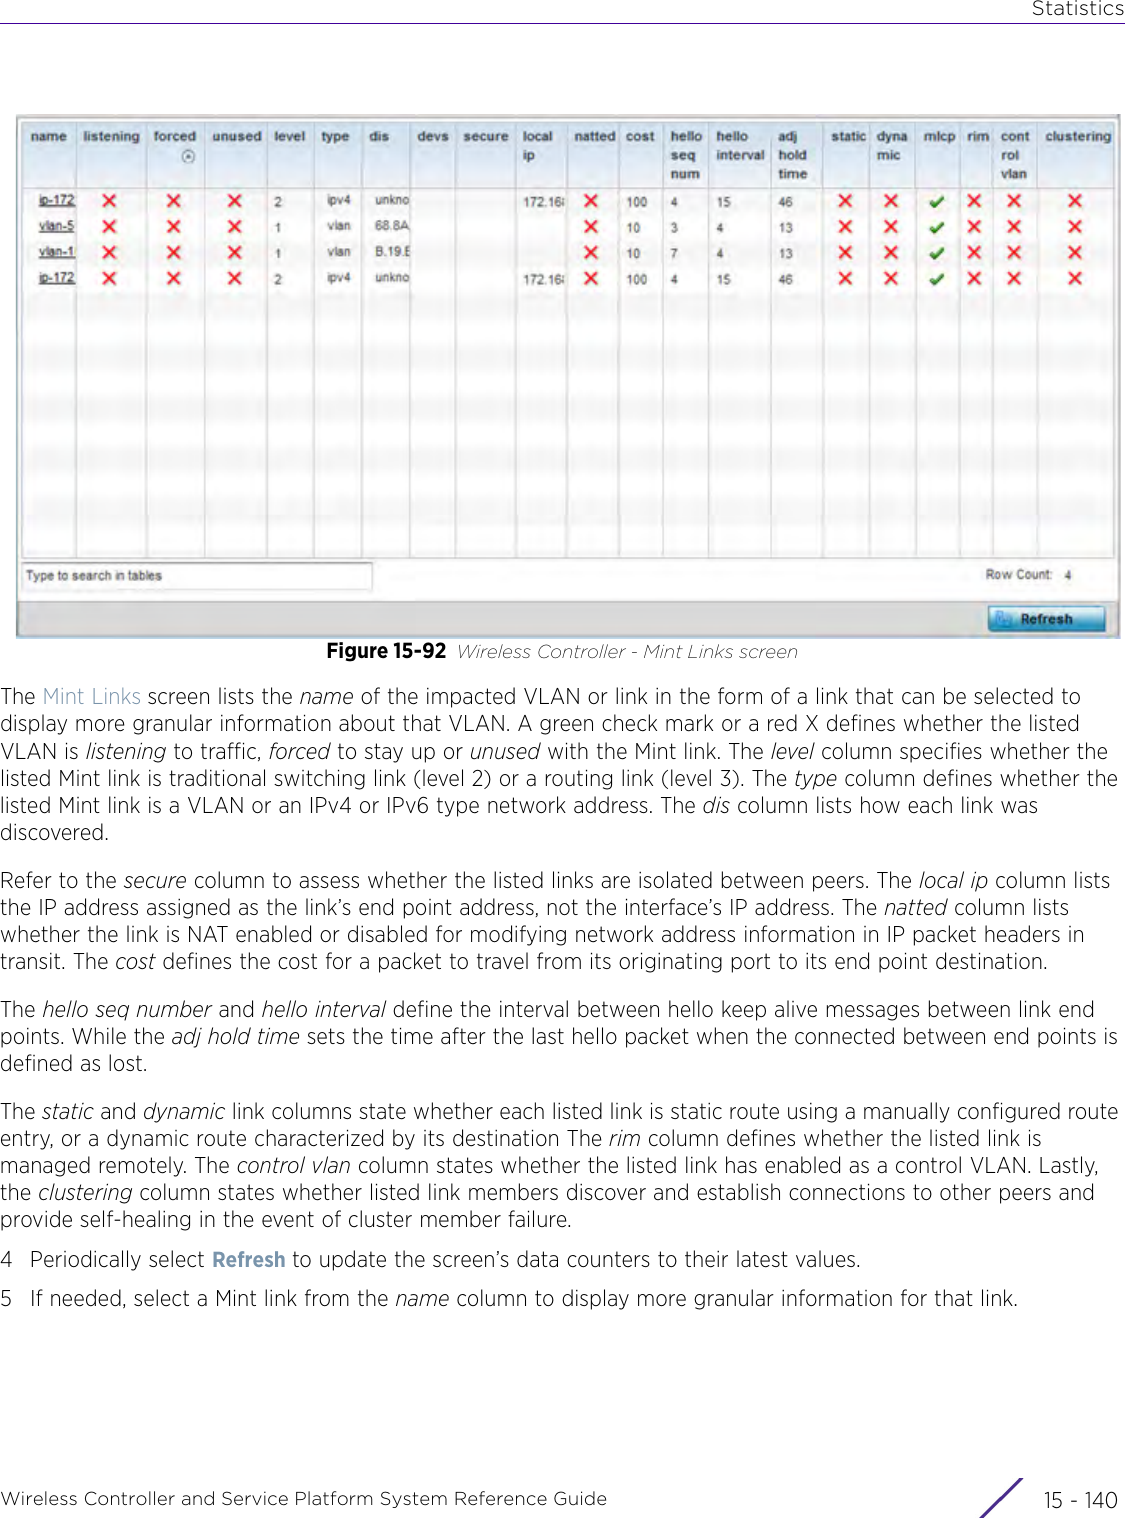 StatisticsWireless Controller and Service Platform System Reference Guide  15 - 140Figure 15-92 Wireless Controller - Mint Links screenThe Mint Links screen lists the name of the impacted VLAN or link in the form of a link that can be selected to display more granular information about that VLAN. A green check mark or a red X defines whether the listed VLAN is listening to traffic, forced to stay up or unused with the Mint link. The level column specifies whether the listed Mint link is traditional switching link (level 2) or a routing link (level 3). The type column defines whether the listed Mint link is a VLAN or an IPv4 or IPv6 type network address. The dis column lists how each link was discovered.Refer to the secure column to assess whether the listed links are isolated between peers. The local ip column lists the IP address assigned as the link’s end point address, not the interface’s IP address. The natted column lists whether the link is NAT enabled or disabled for modifying network address information in IP packet headers in transit. The cost defines the cost for a packet to travel from its originating port to its end point destination.The hello seq number and hello interval define the interval between hello keep alive messages between link end points. While the adj hold time sets the time after the last hello packet when the connected between end points is defined as lost. The static and dynamic link columns state whether each listed link is static route using a manually configured route entry, or a dynamic route characterized by its destination The rim column defines whether the listed link is managed remotely. The control vlan column states whether the listed link has enabled as a control VLAN. Lastly, the clustering column states whether listed link members discover and establish connections to other peers and provide self-healing in the event of cluster member failure.4 Periodically select Refresh to update the screen’s data counters to their latest values.5 If needed, select a Mint link from the name column to display more granular information for that link.